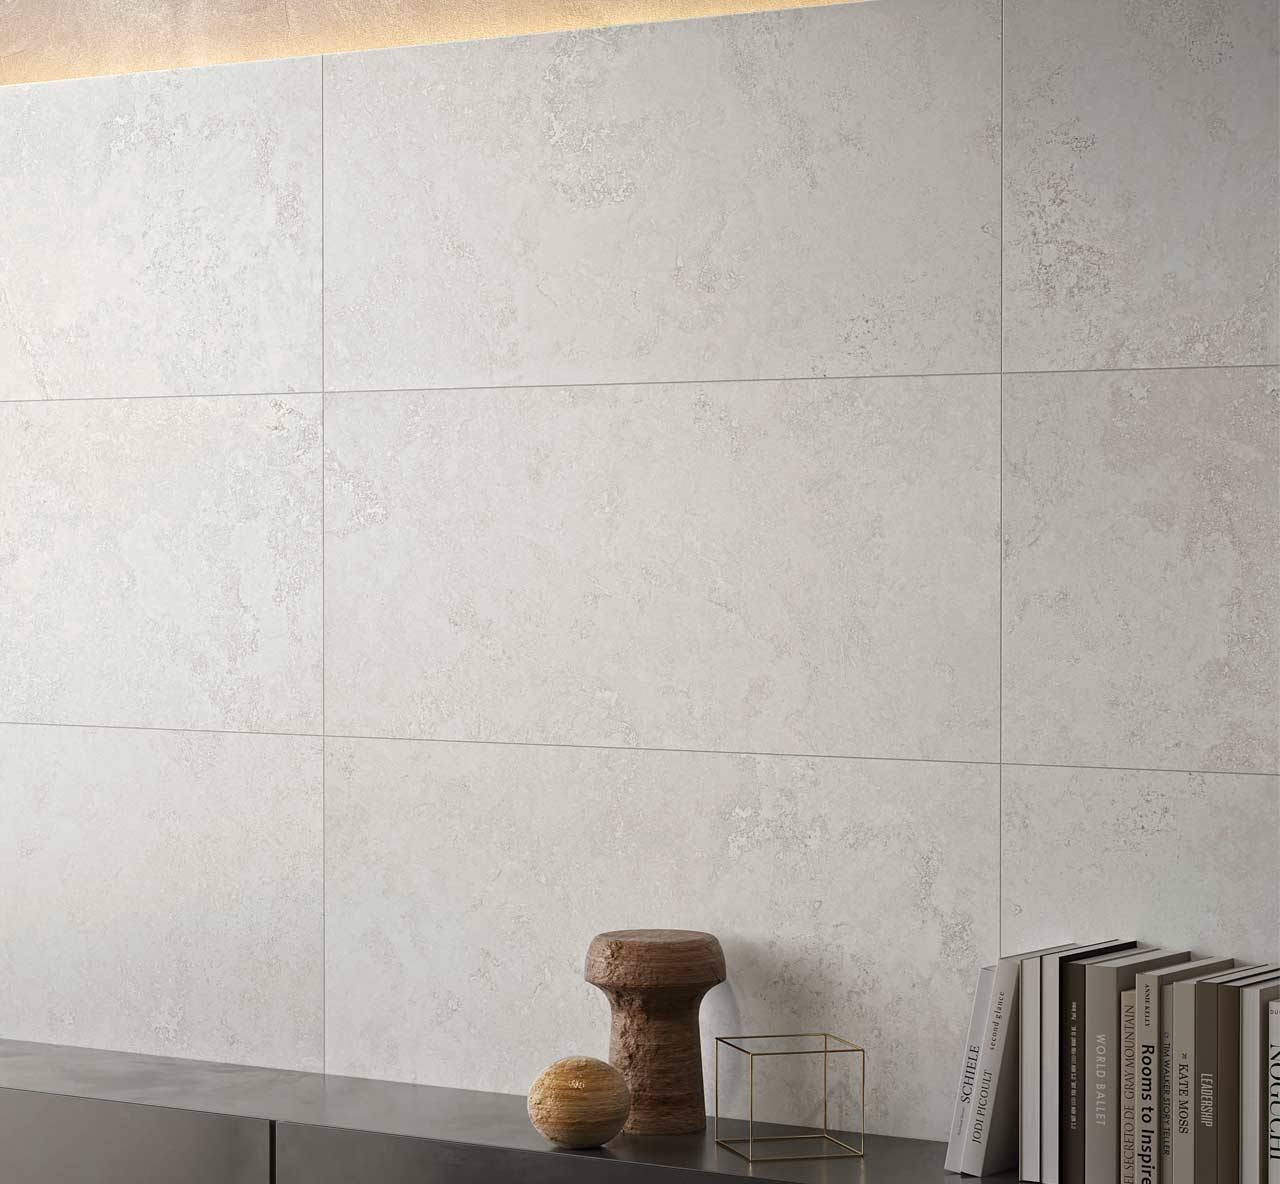 Travertino Bianco Travertine Effect Tiles used as stone wall tiles in a modern sitting room